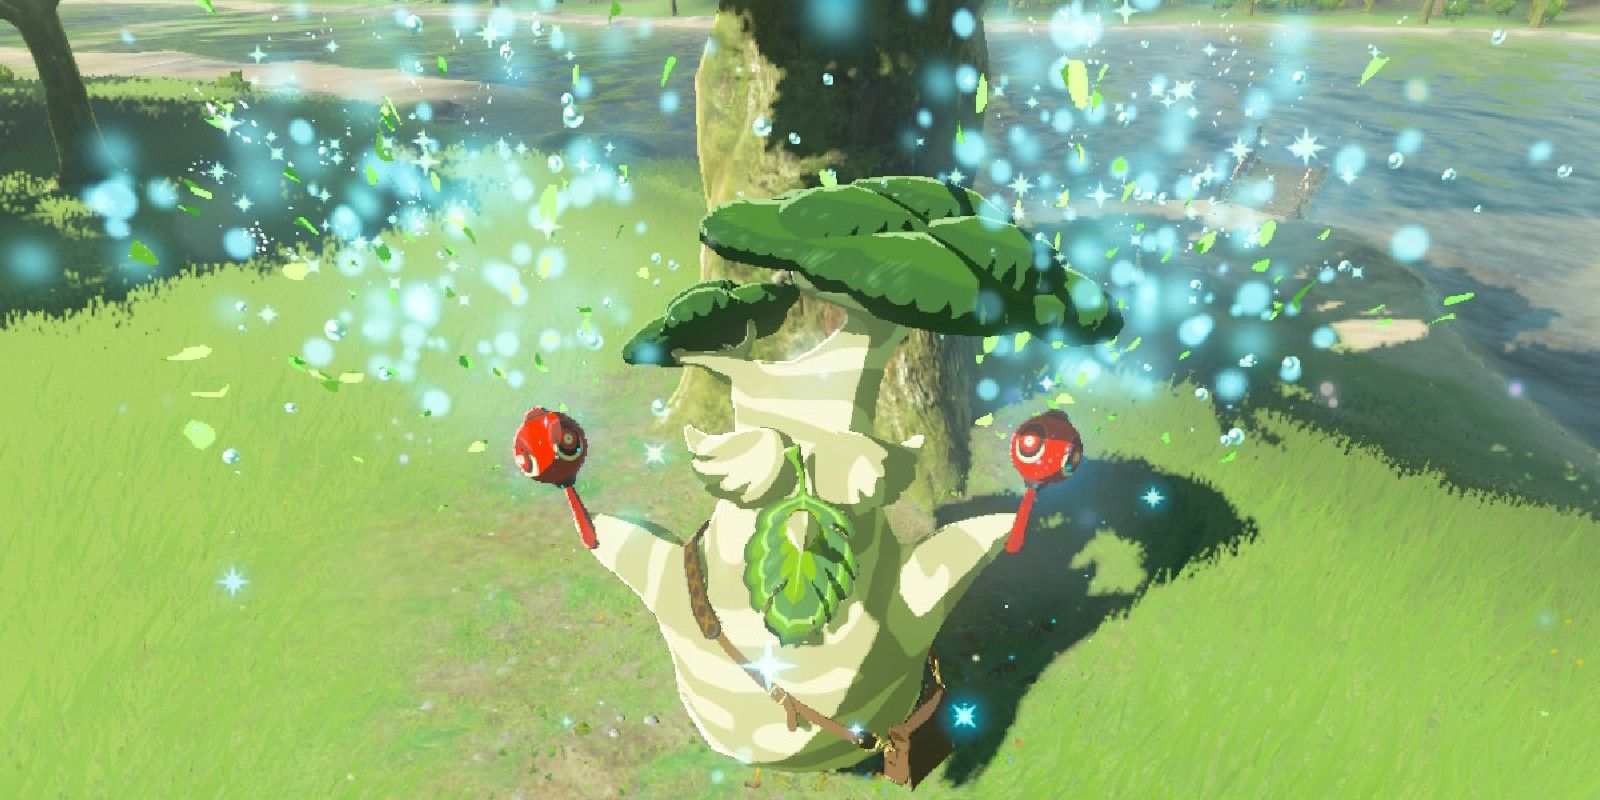 Hestu, a very large Korok - a wooden, leafy creature - performing his dance in Breath of the Wild, holding up a maraca in each hand with blue sparks flying out of their ends.